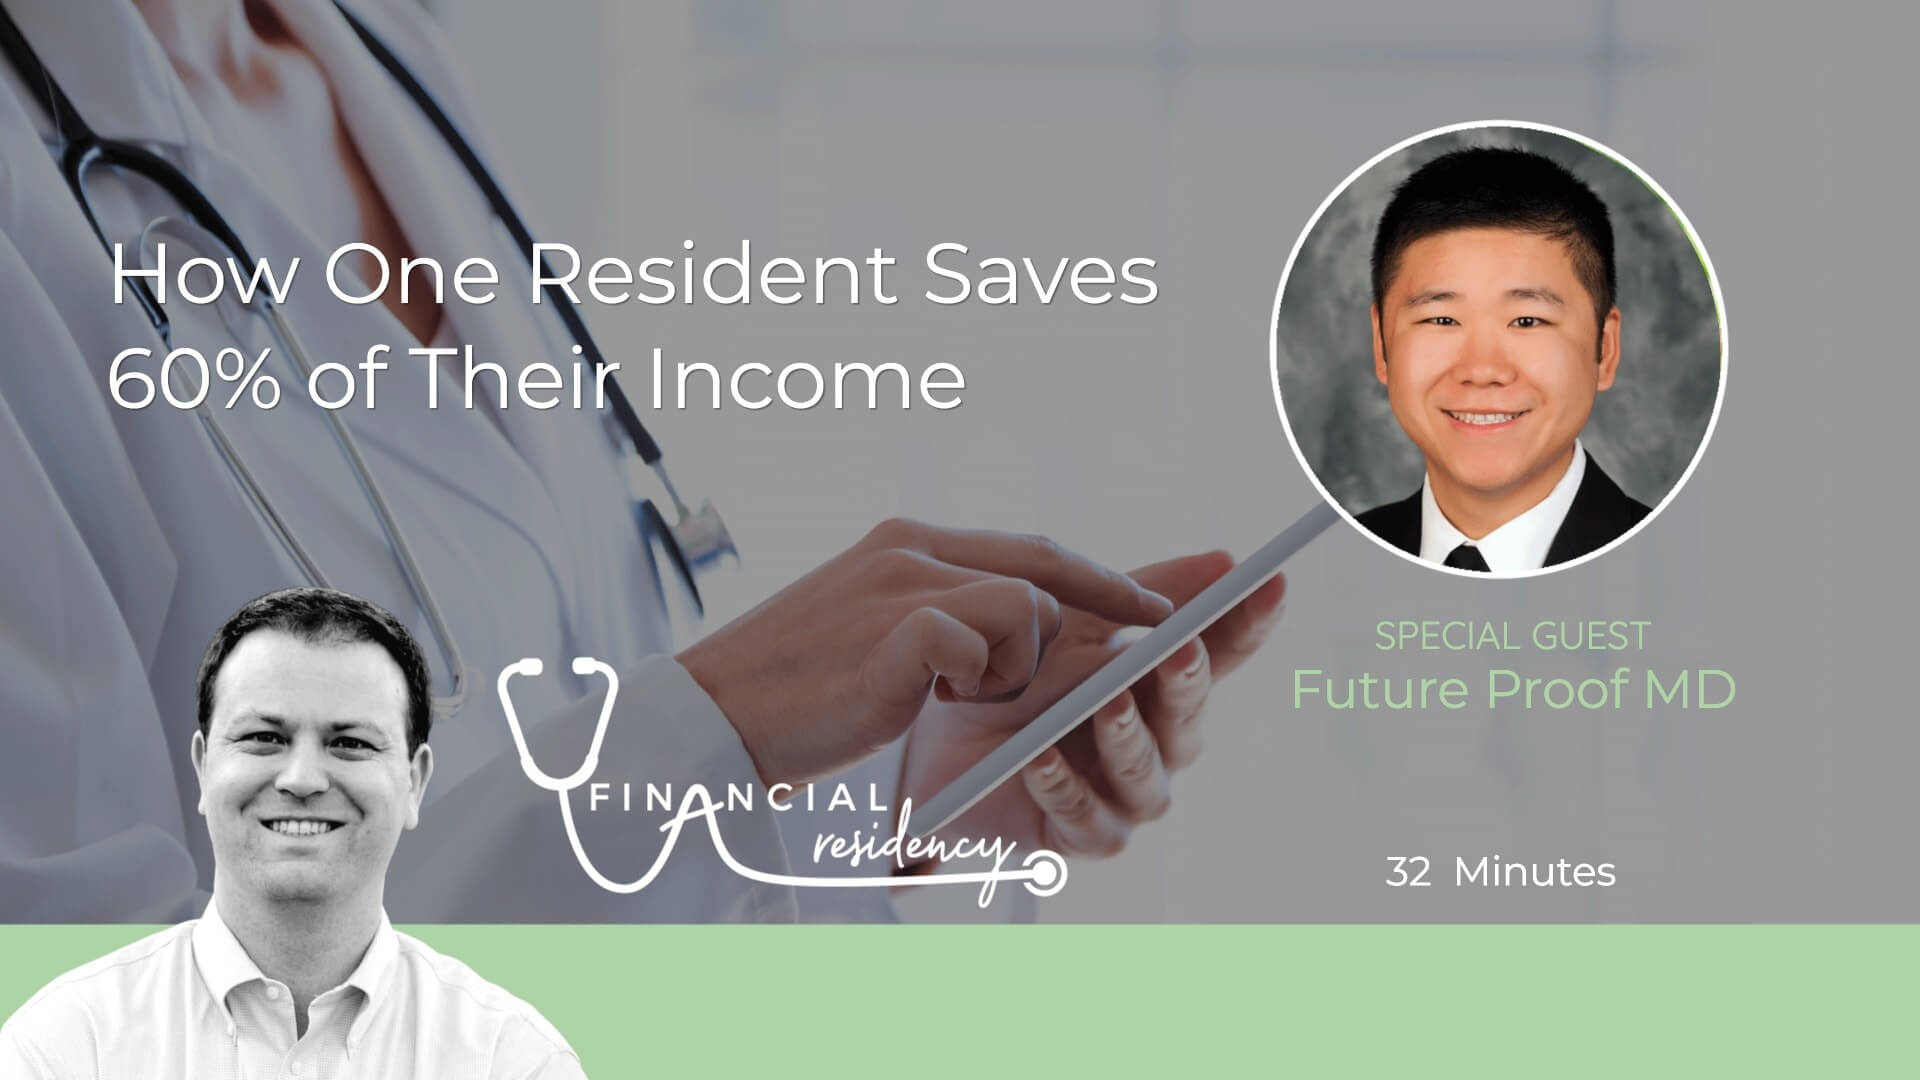 resident physician budget and invests, save more than half of salary as resident